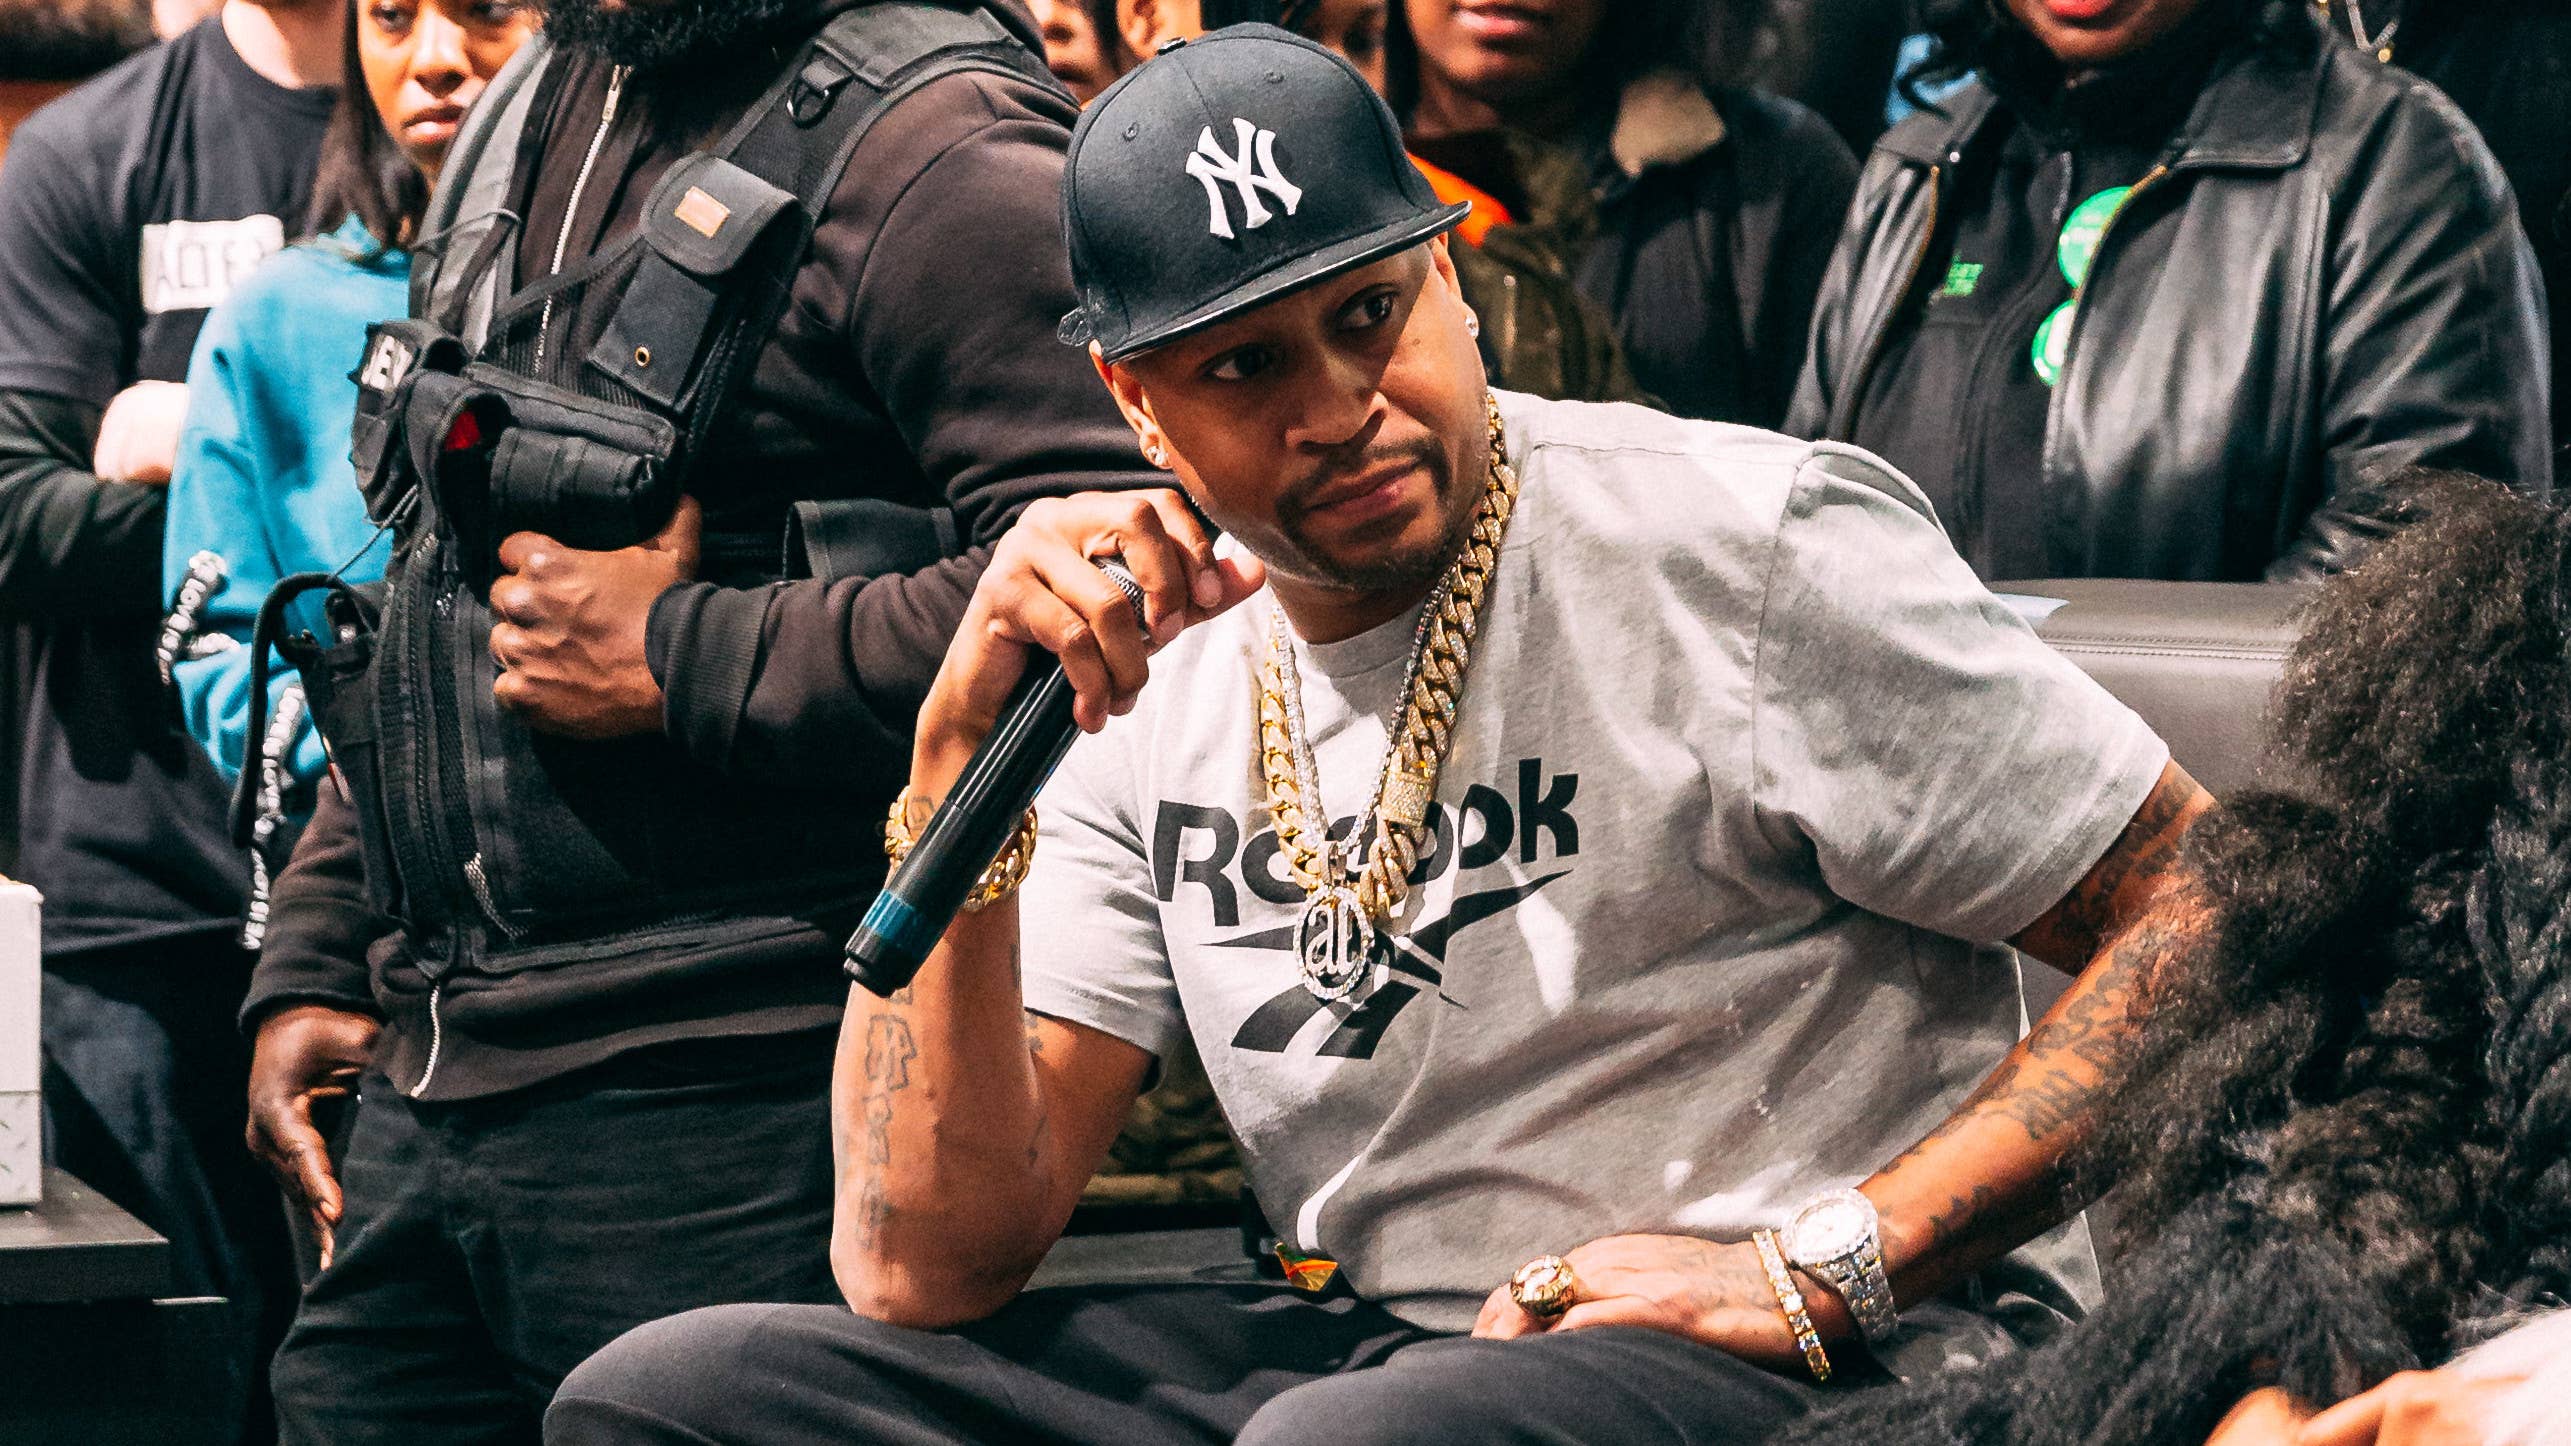 EXCLUSIVE: Allen Iverson Looks Back at Some of His Underrated Signature  Sneakers